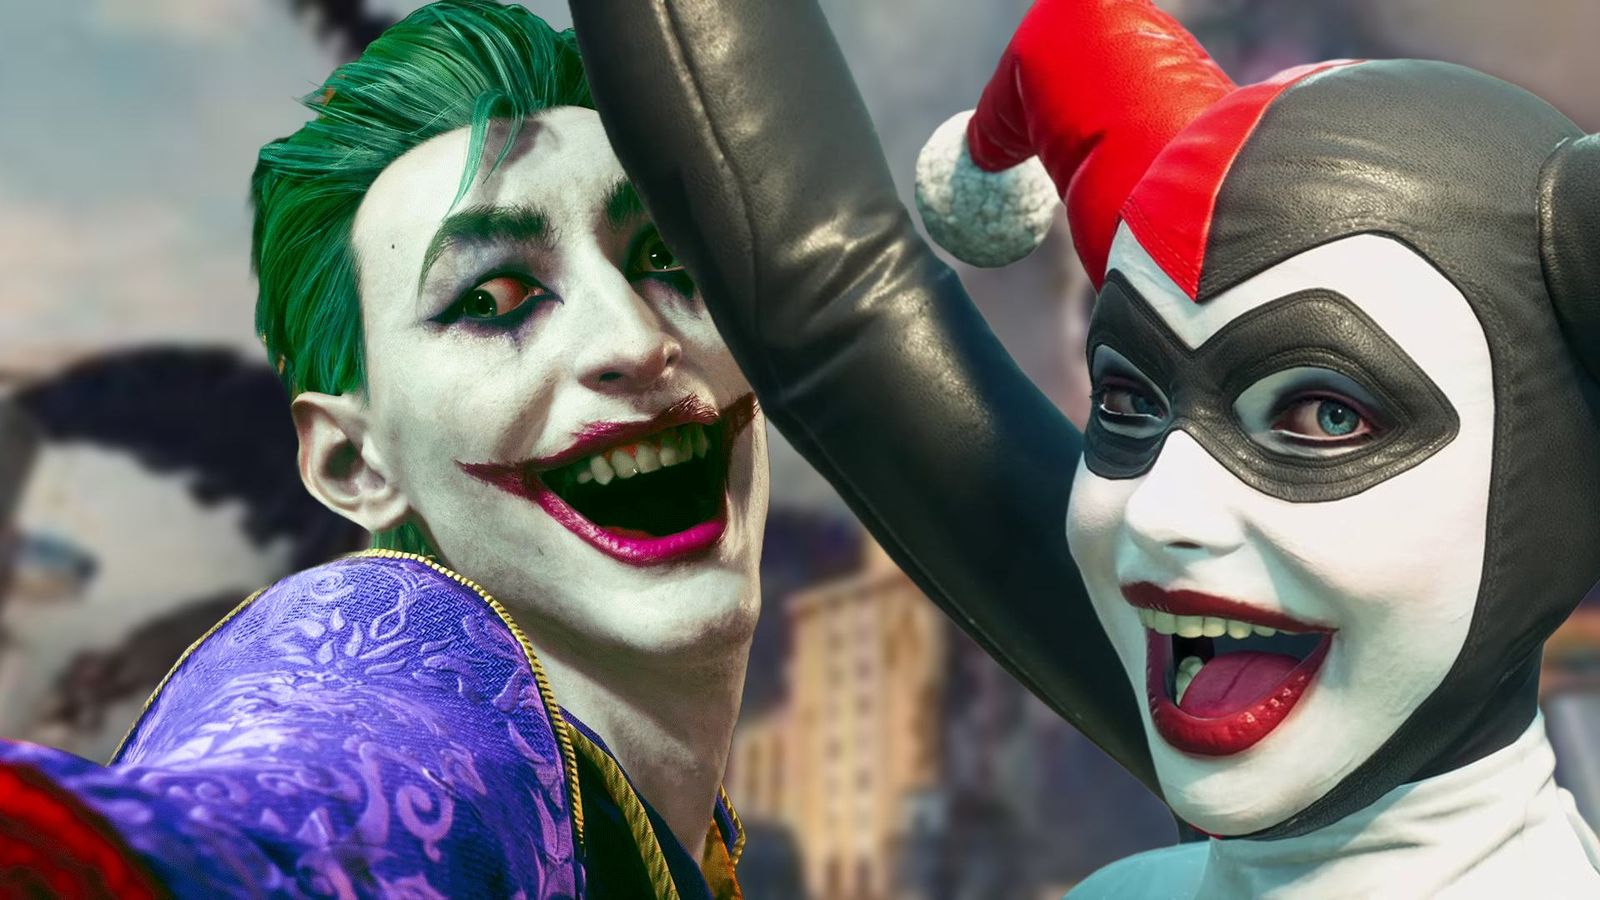 the joker and harley quinn are taking a selfie together .